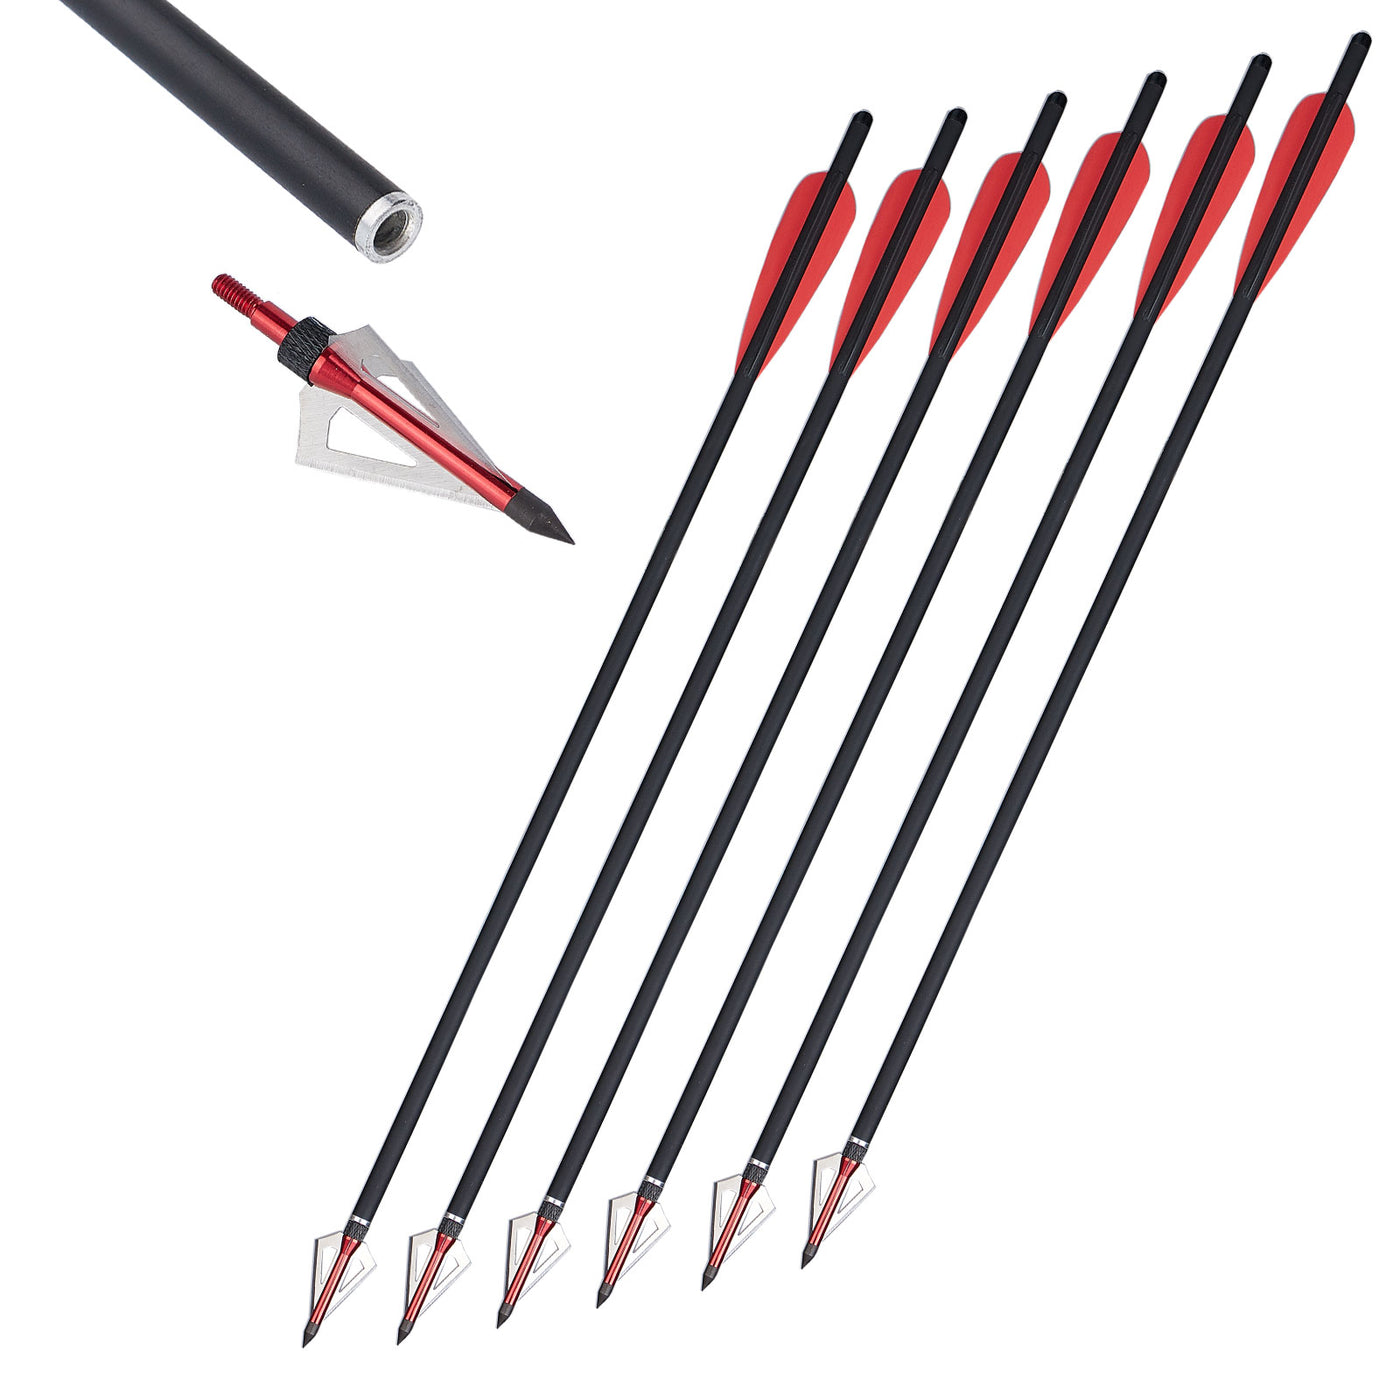 6x 20" Fletched Mixed Carbon Crossbow Archery Arrows Bolts and 6x 100-grain Broadheads